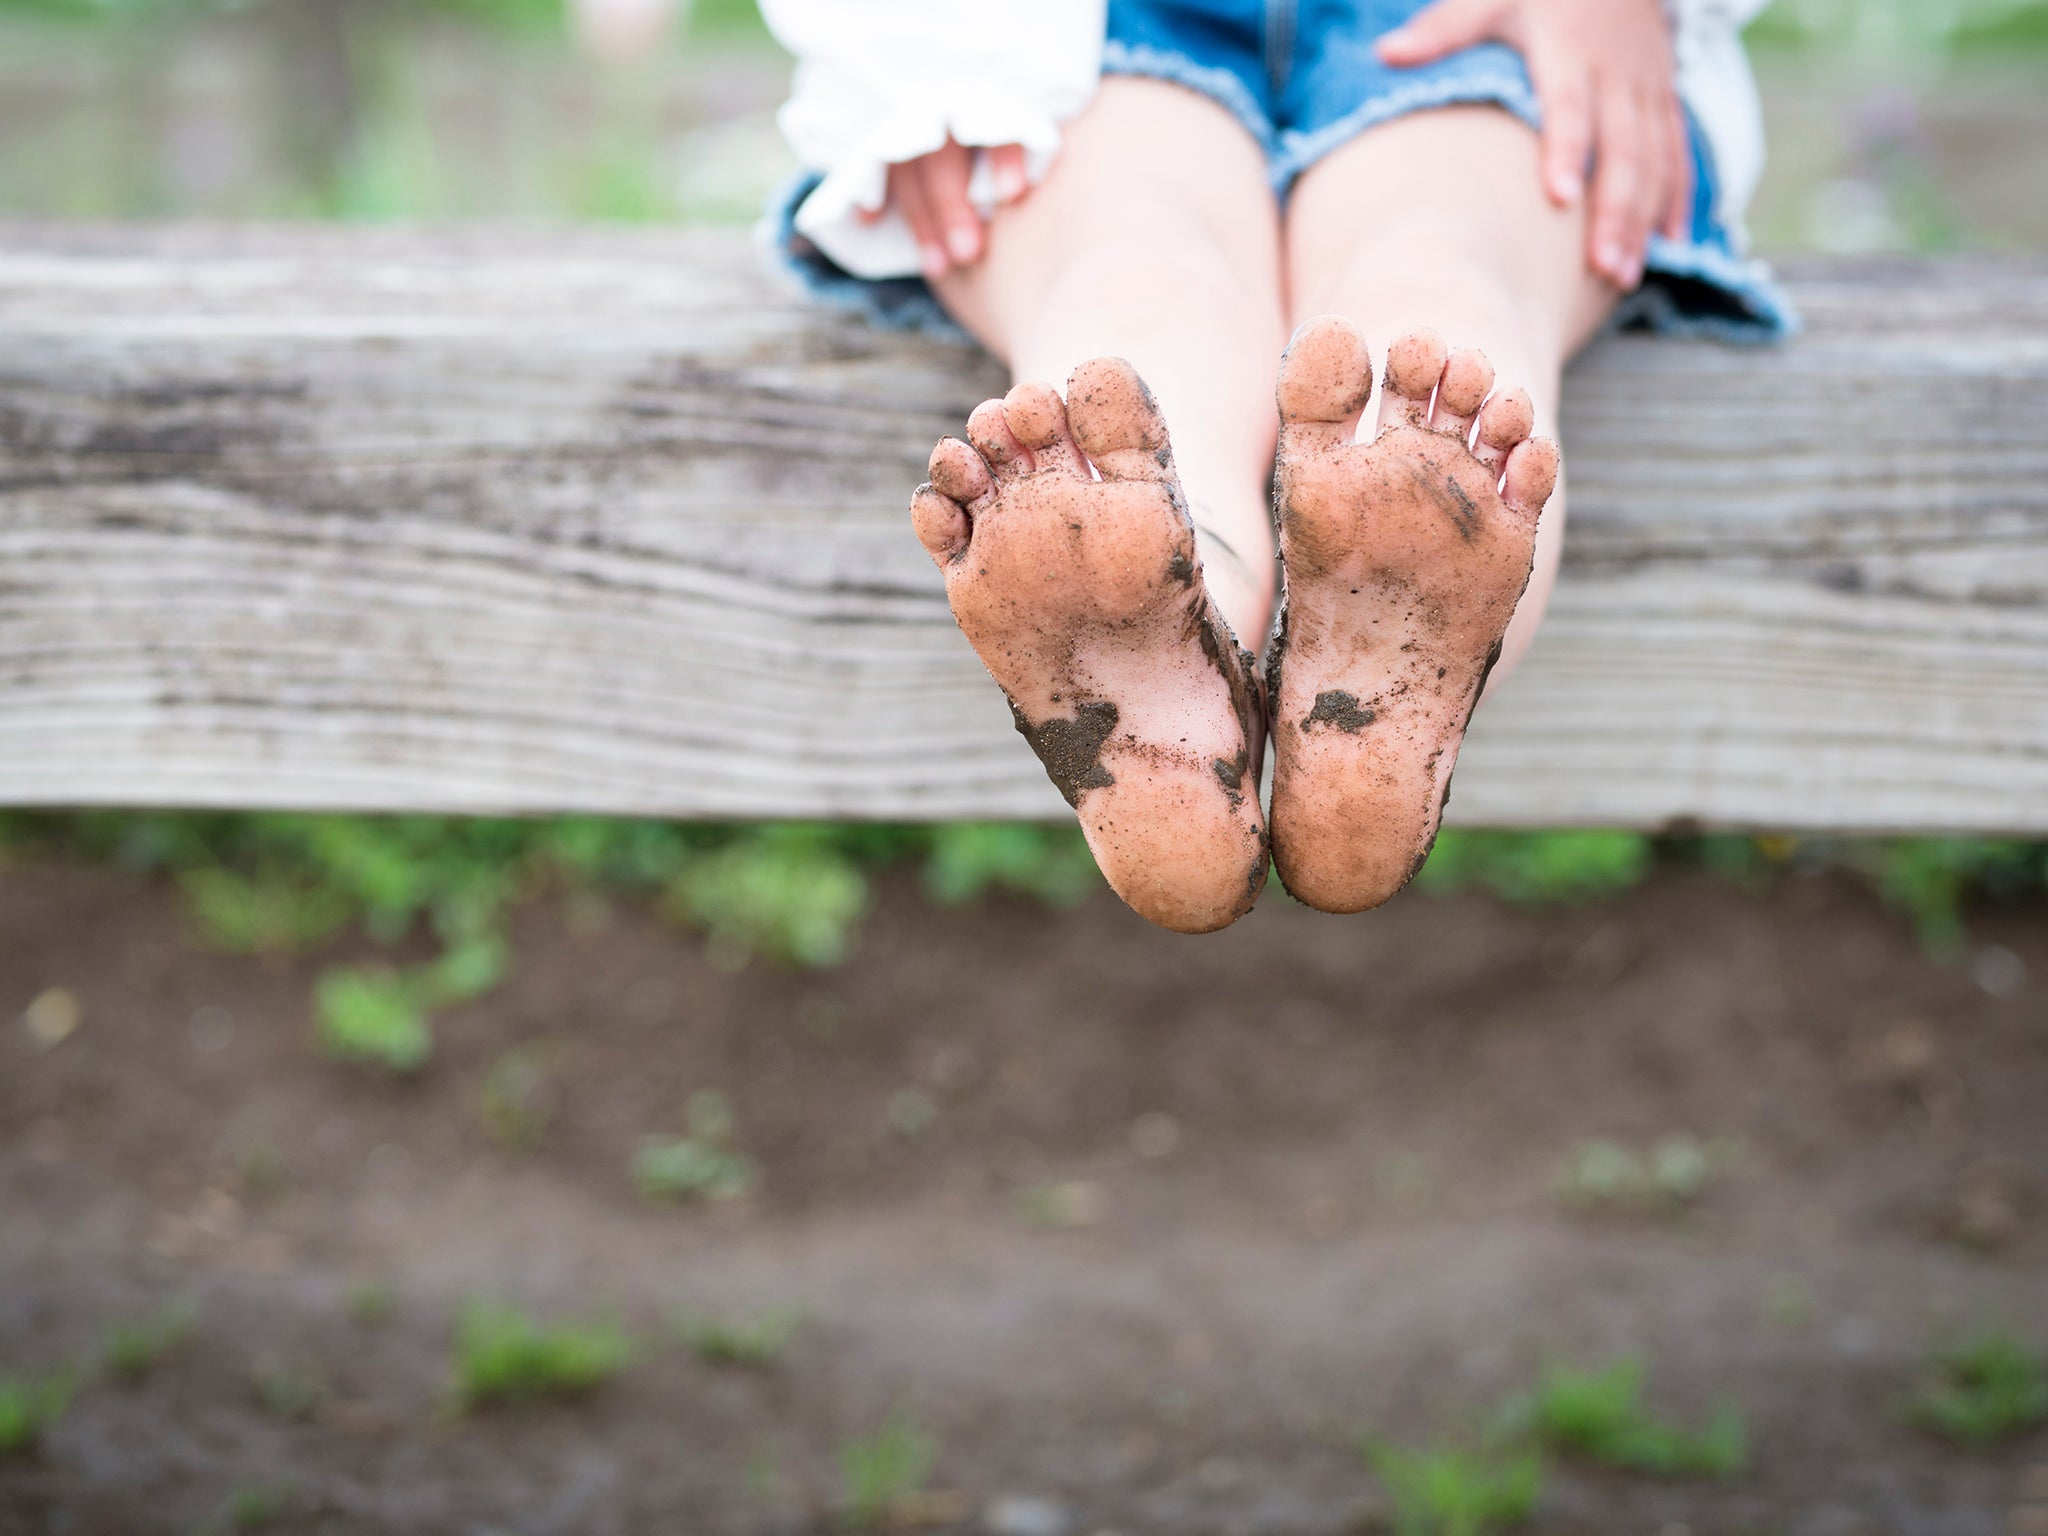 The benefits of bare feet for kids